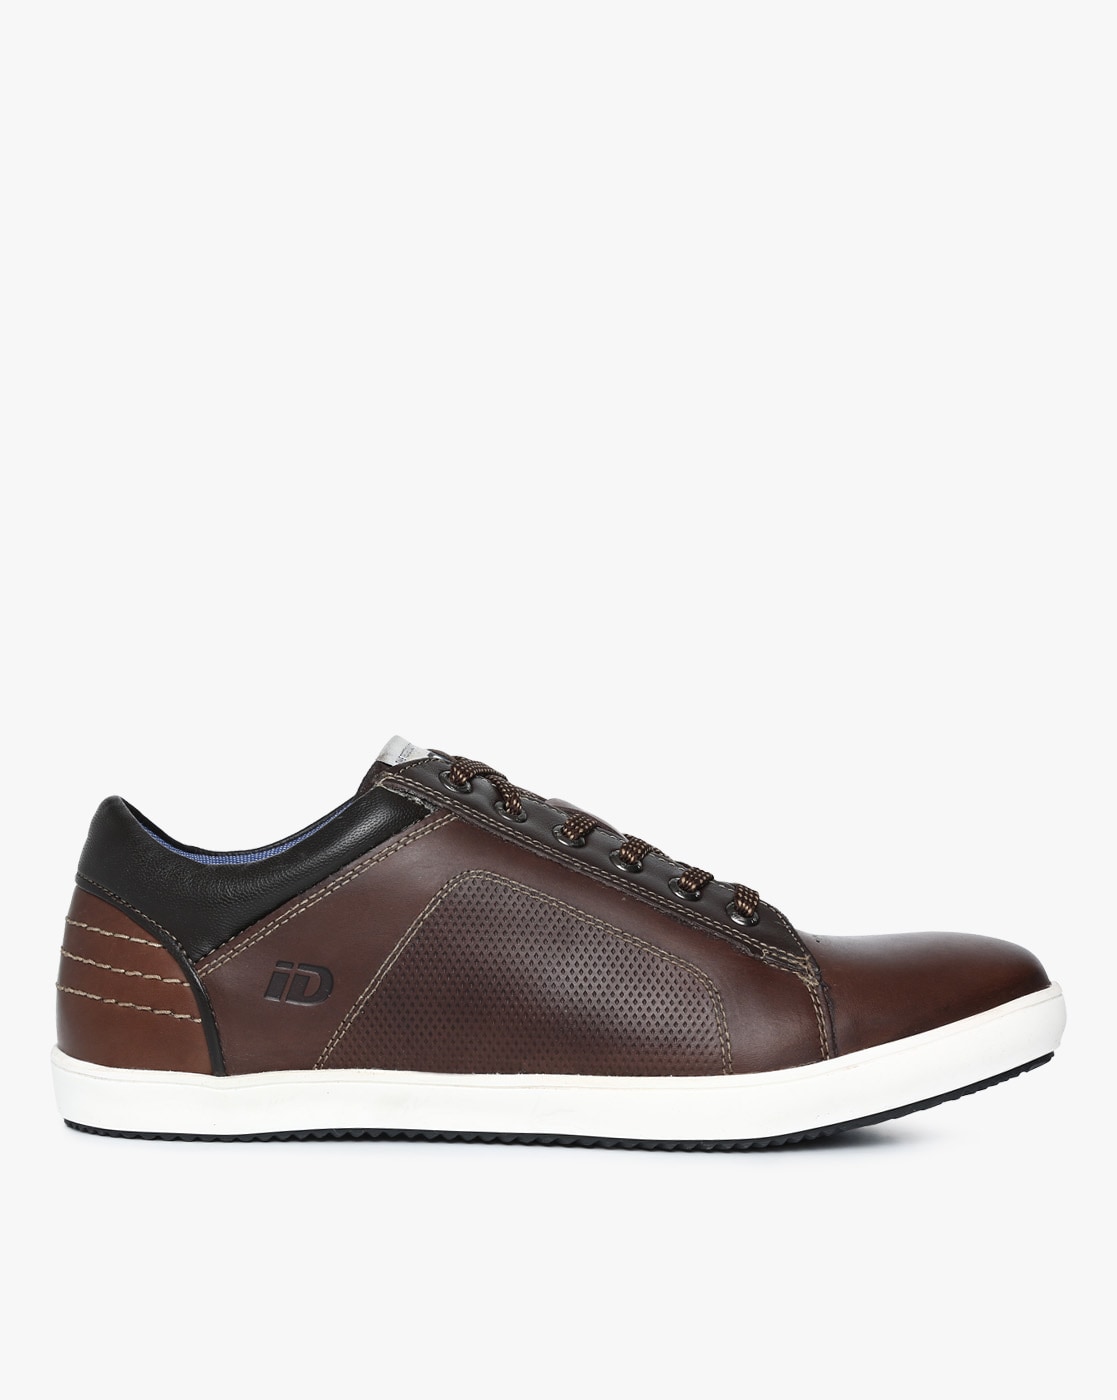 casual formal shoes